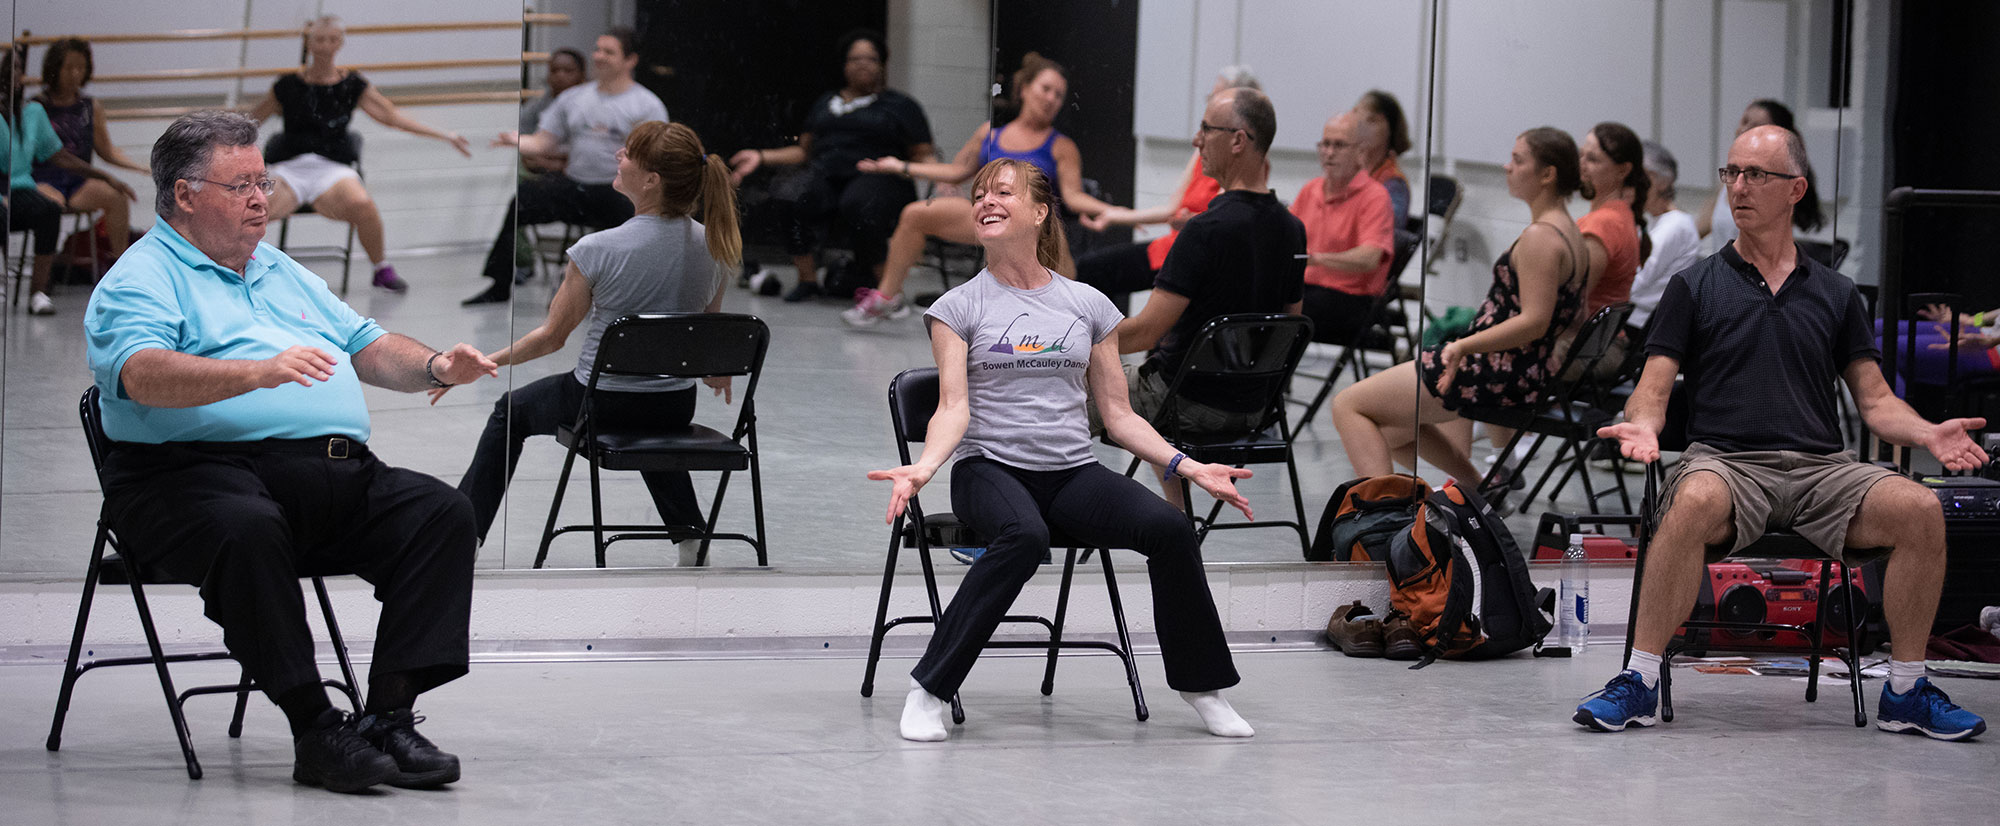 Kennedy Center National Dance Day 2019. Photo Credit Jeff Malet